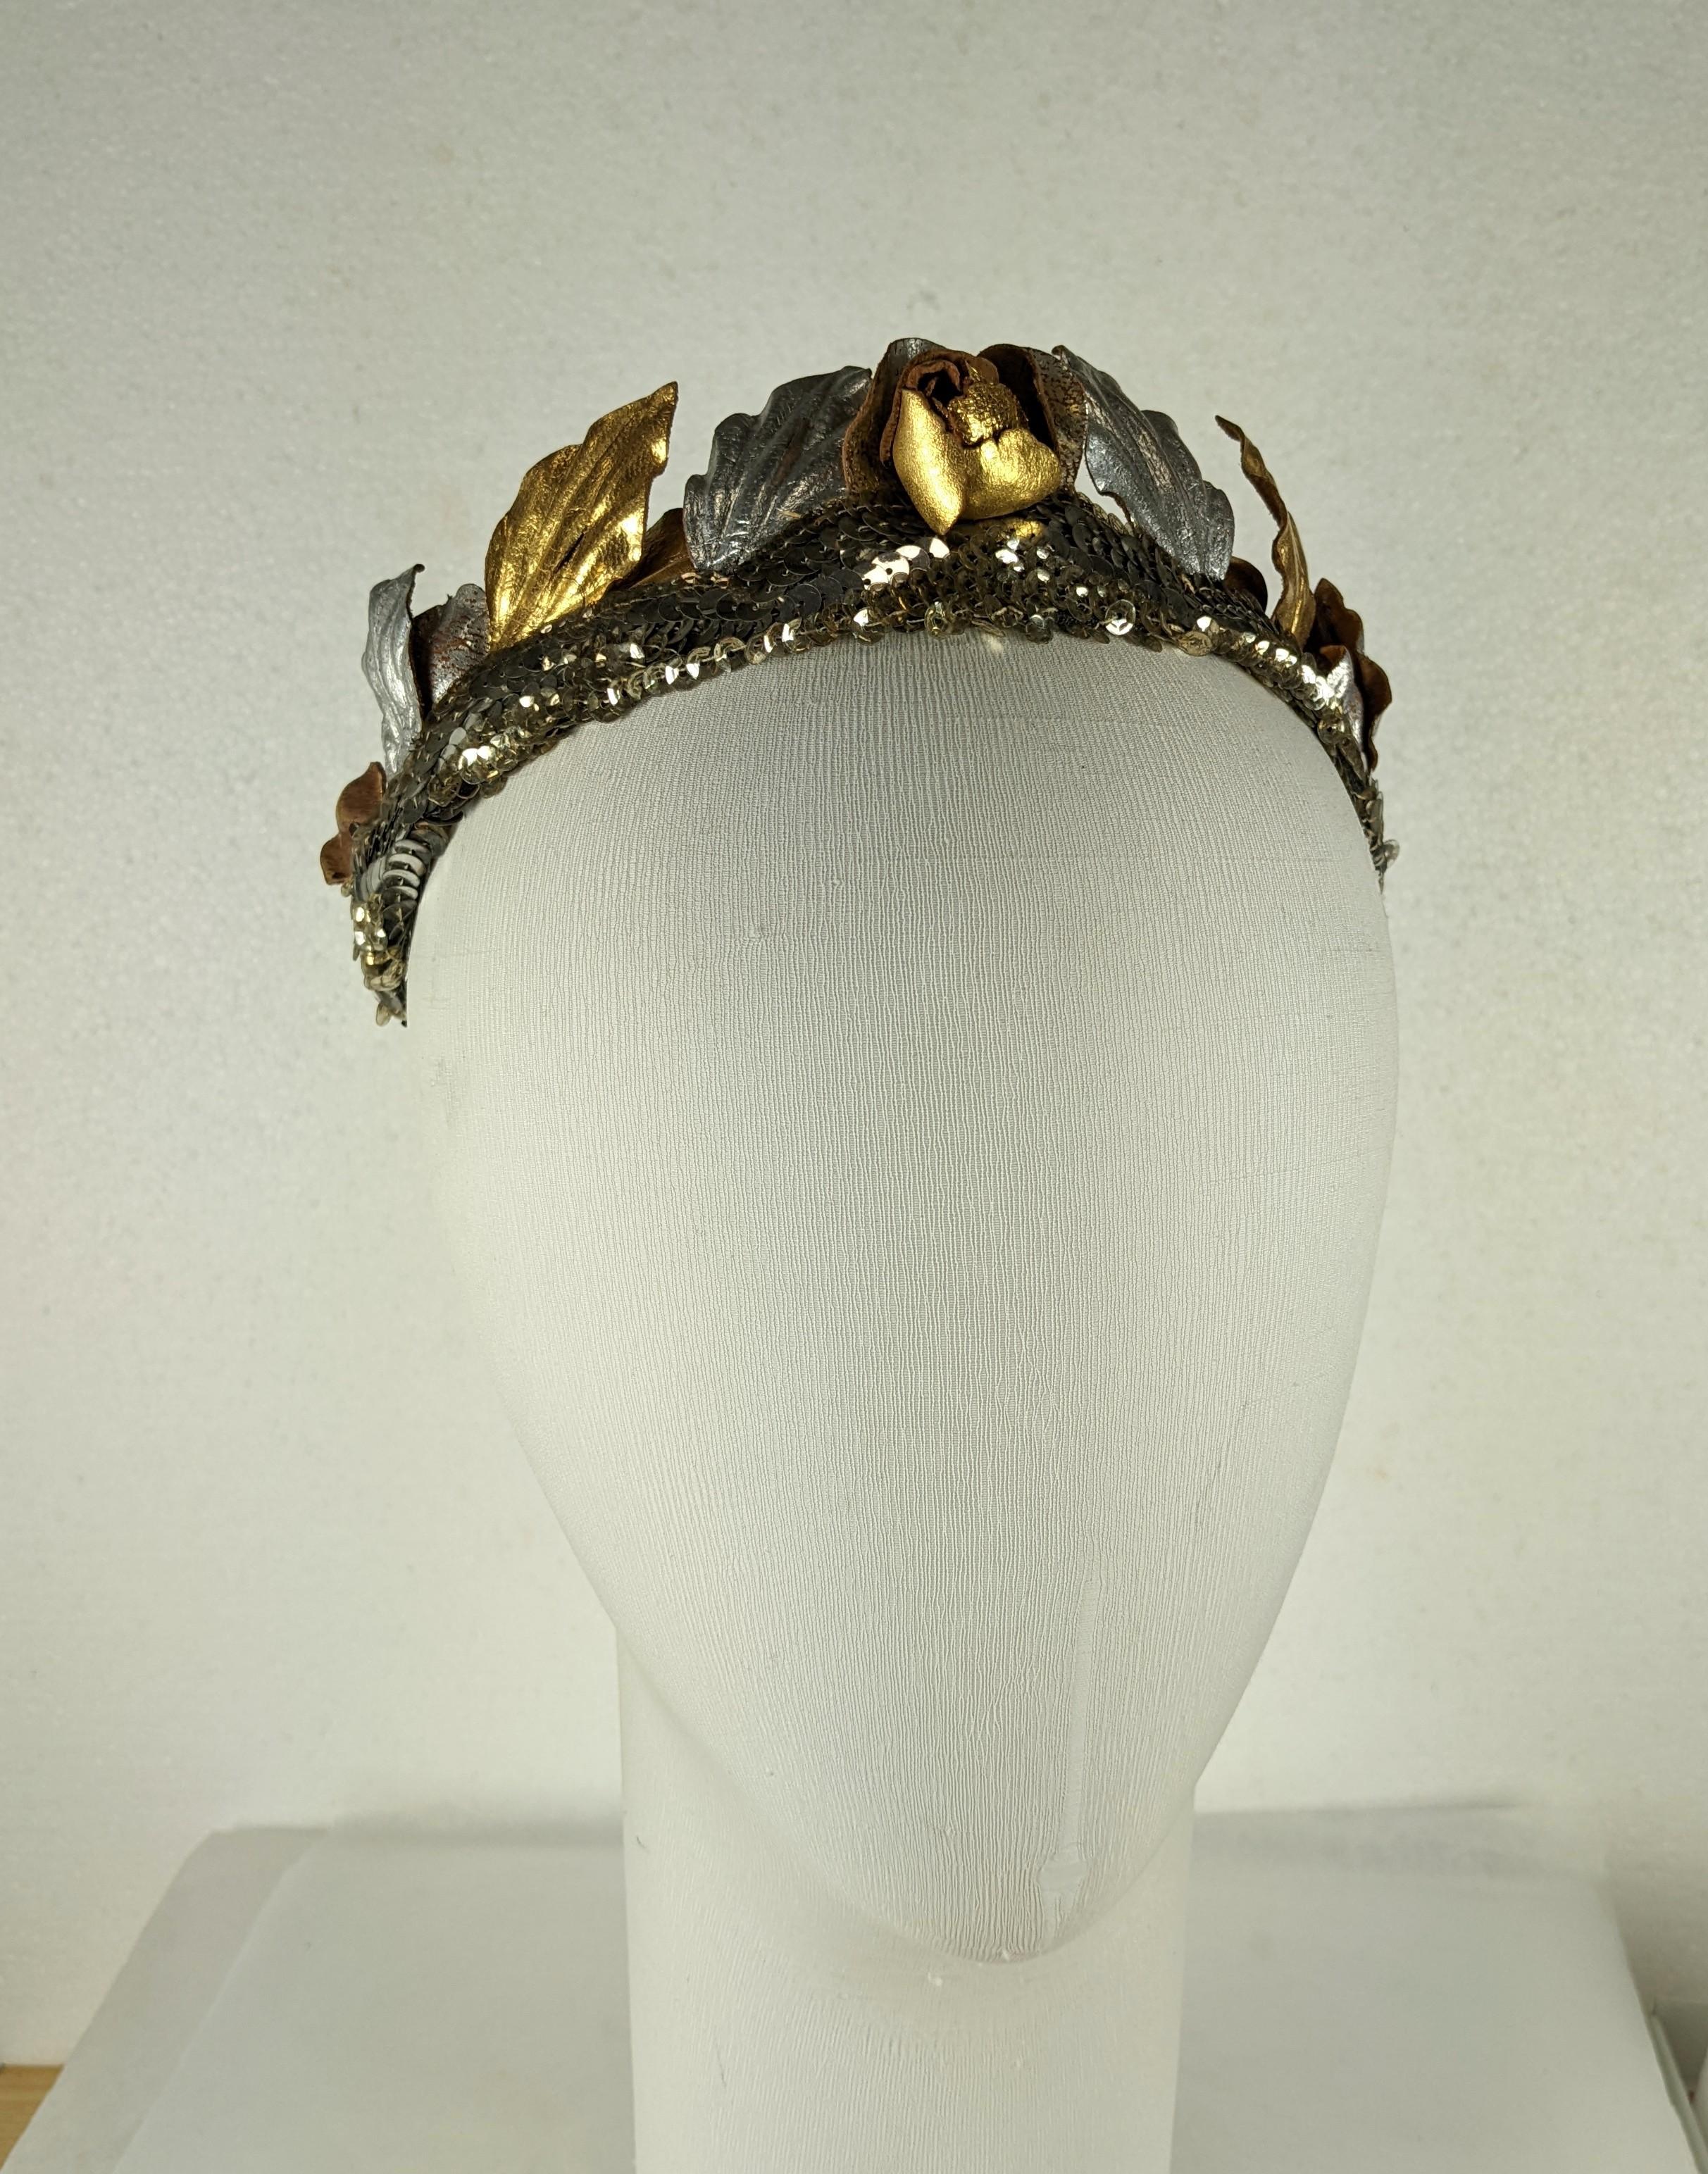 Wonderfl Art Deco Sequin Hair Bandeau of Gilt and Silver Leather Roses from the 1920's. Handmade Silver and Gold leaves and petals are mounted above a band of silver sequins. A Gilt leather rose sits at the center.  1920's France. 
Total 19